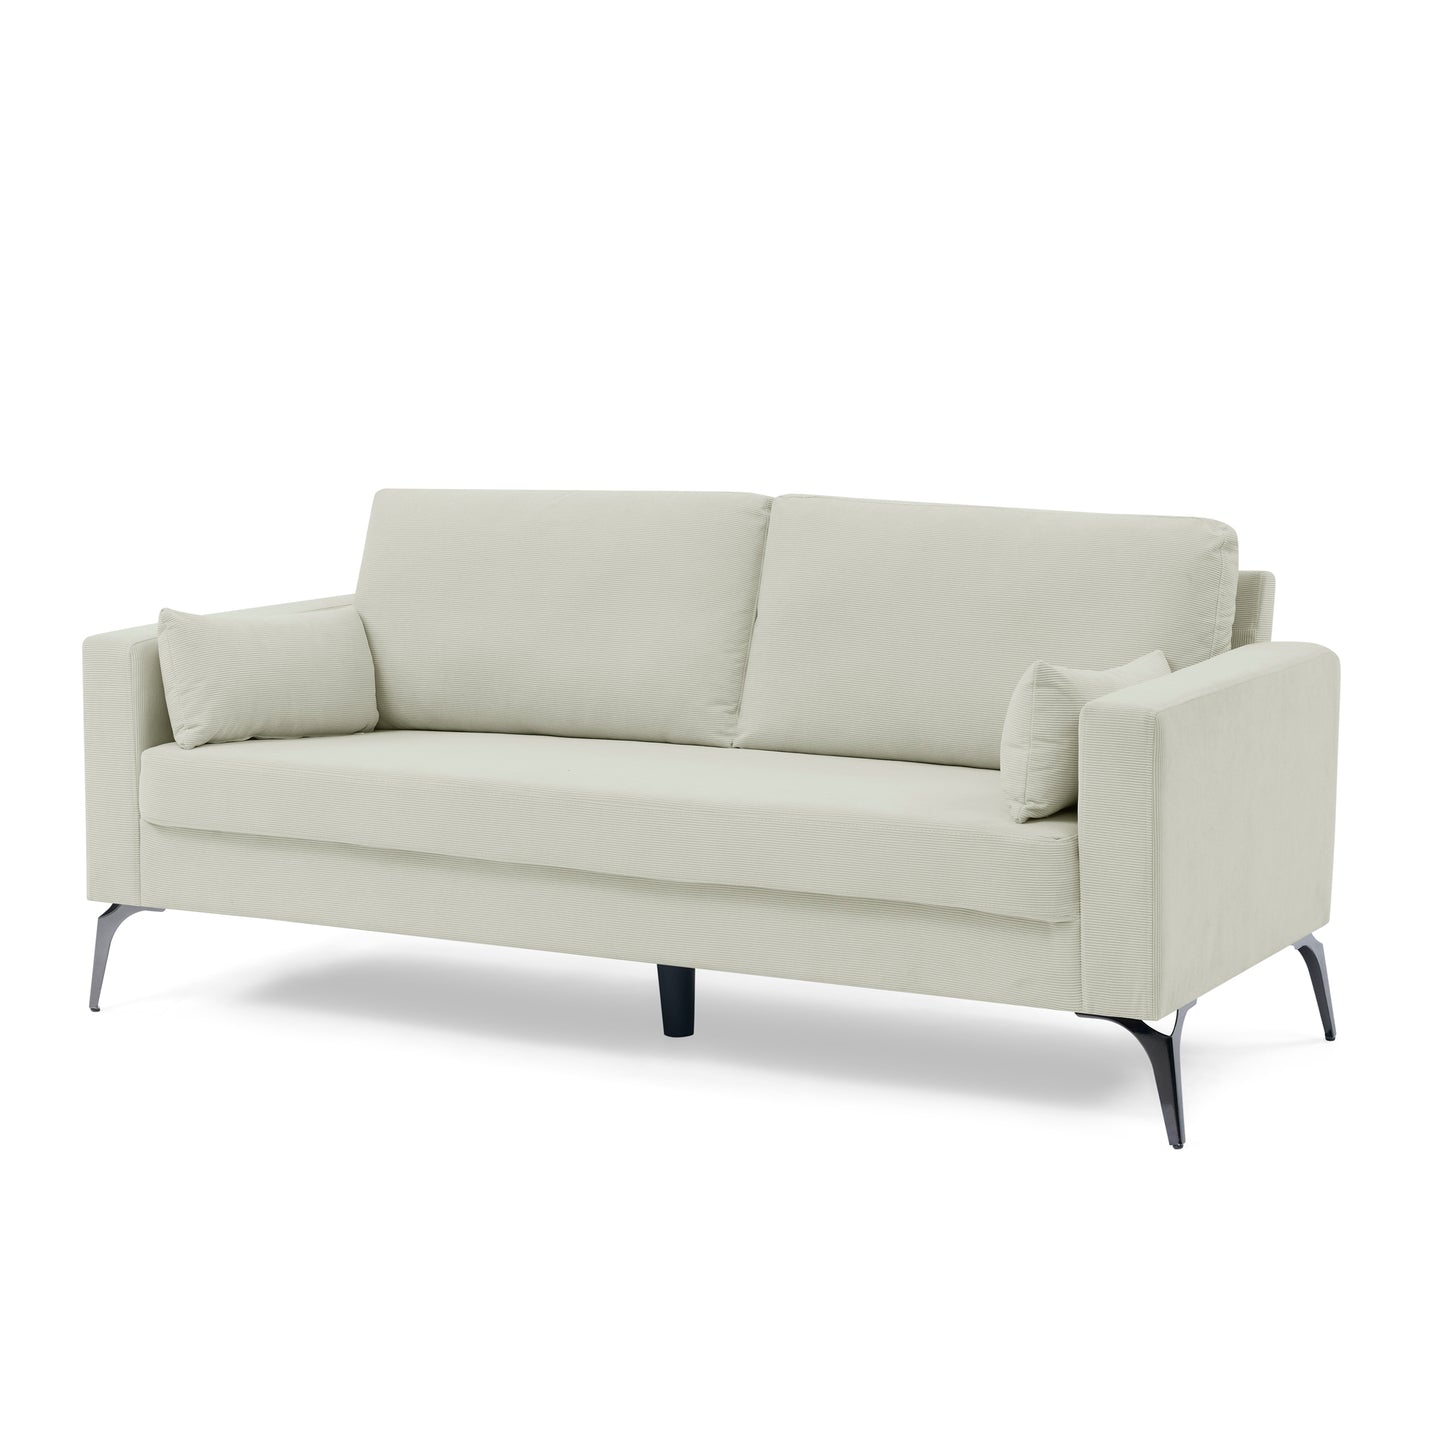 3-Seater Sofa with Square Arms and Tight Back, with Two Small Pillows,Corduroy Beige